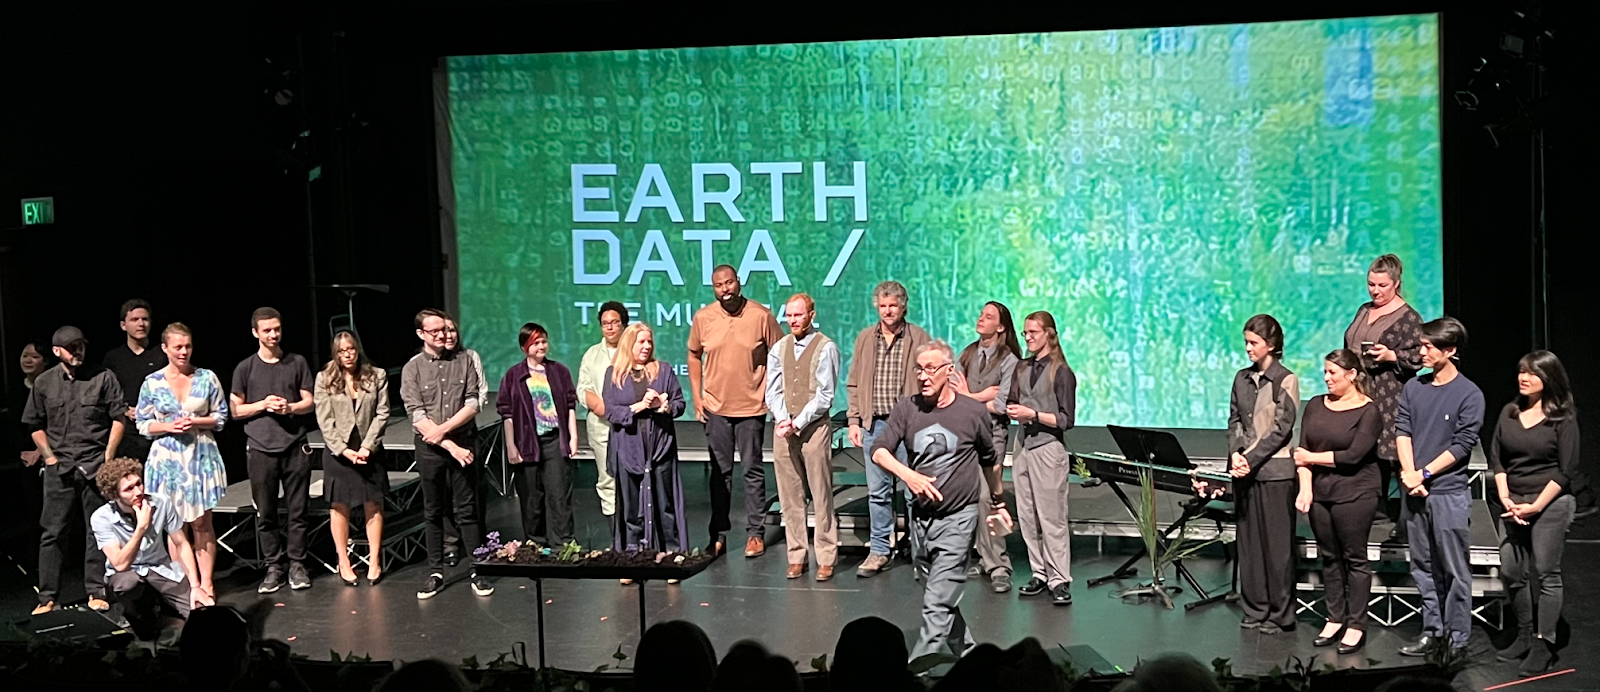 Staging Earth Data in TACIT’s Earth Data: The Musical